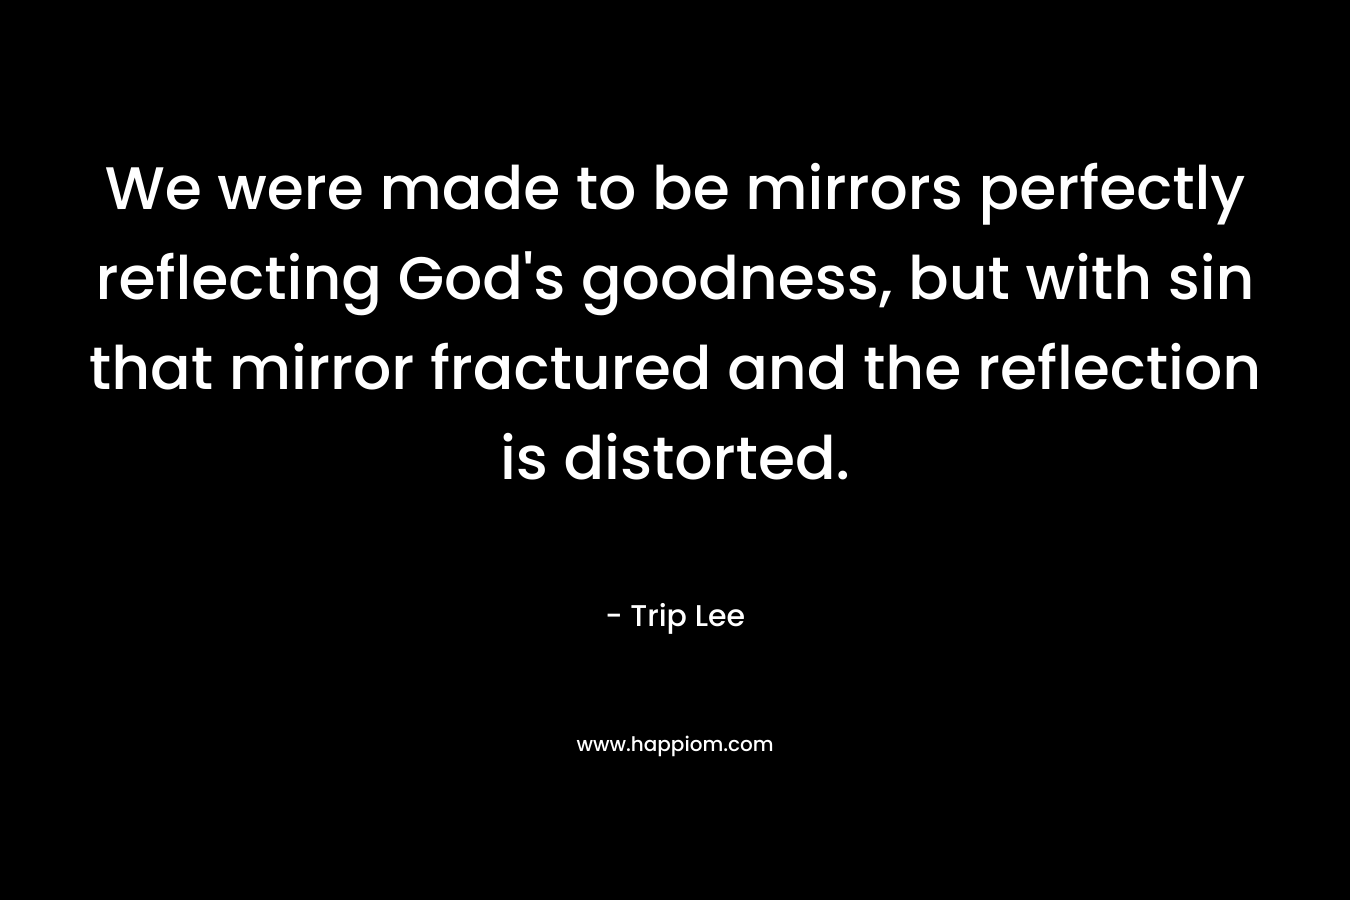 We were made to be mirrors perfectly reflecting God's goodness, but with sin that mirror fractured and the reflection is distorted.